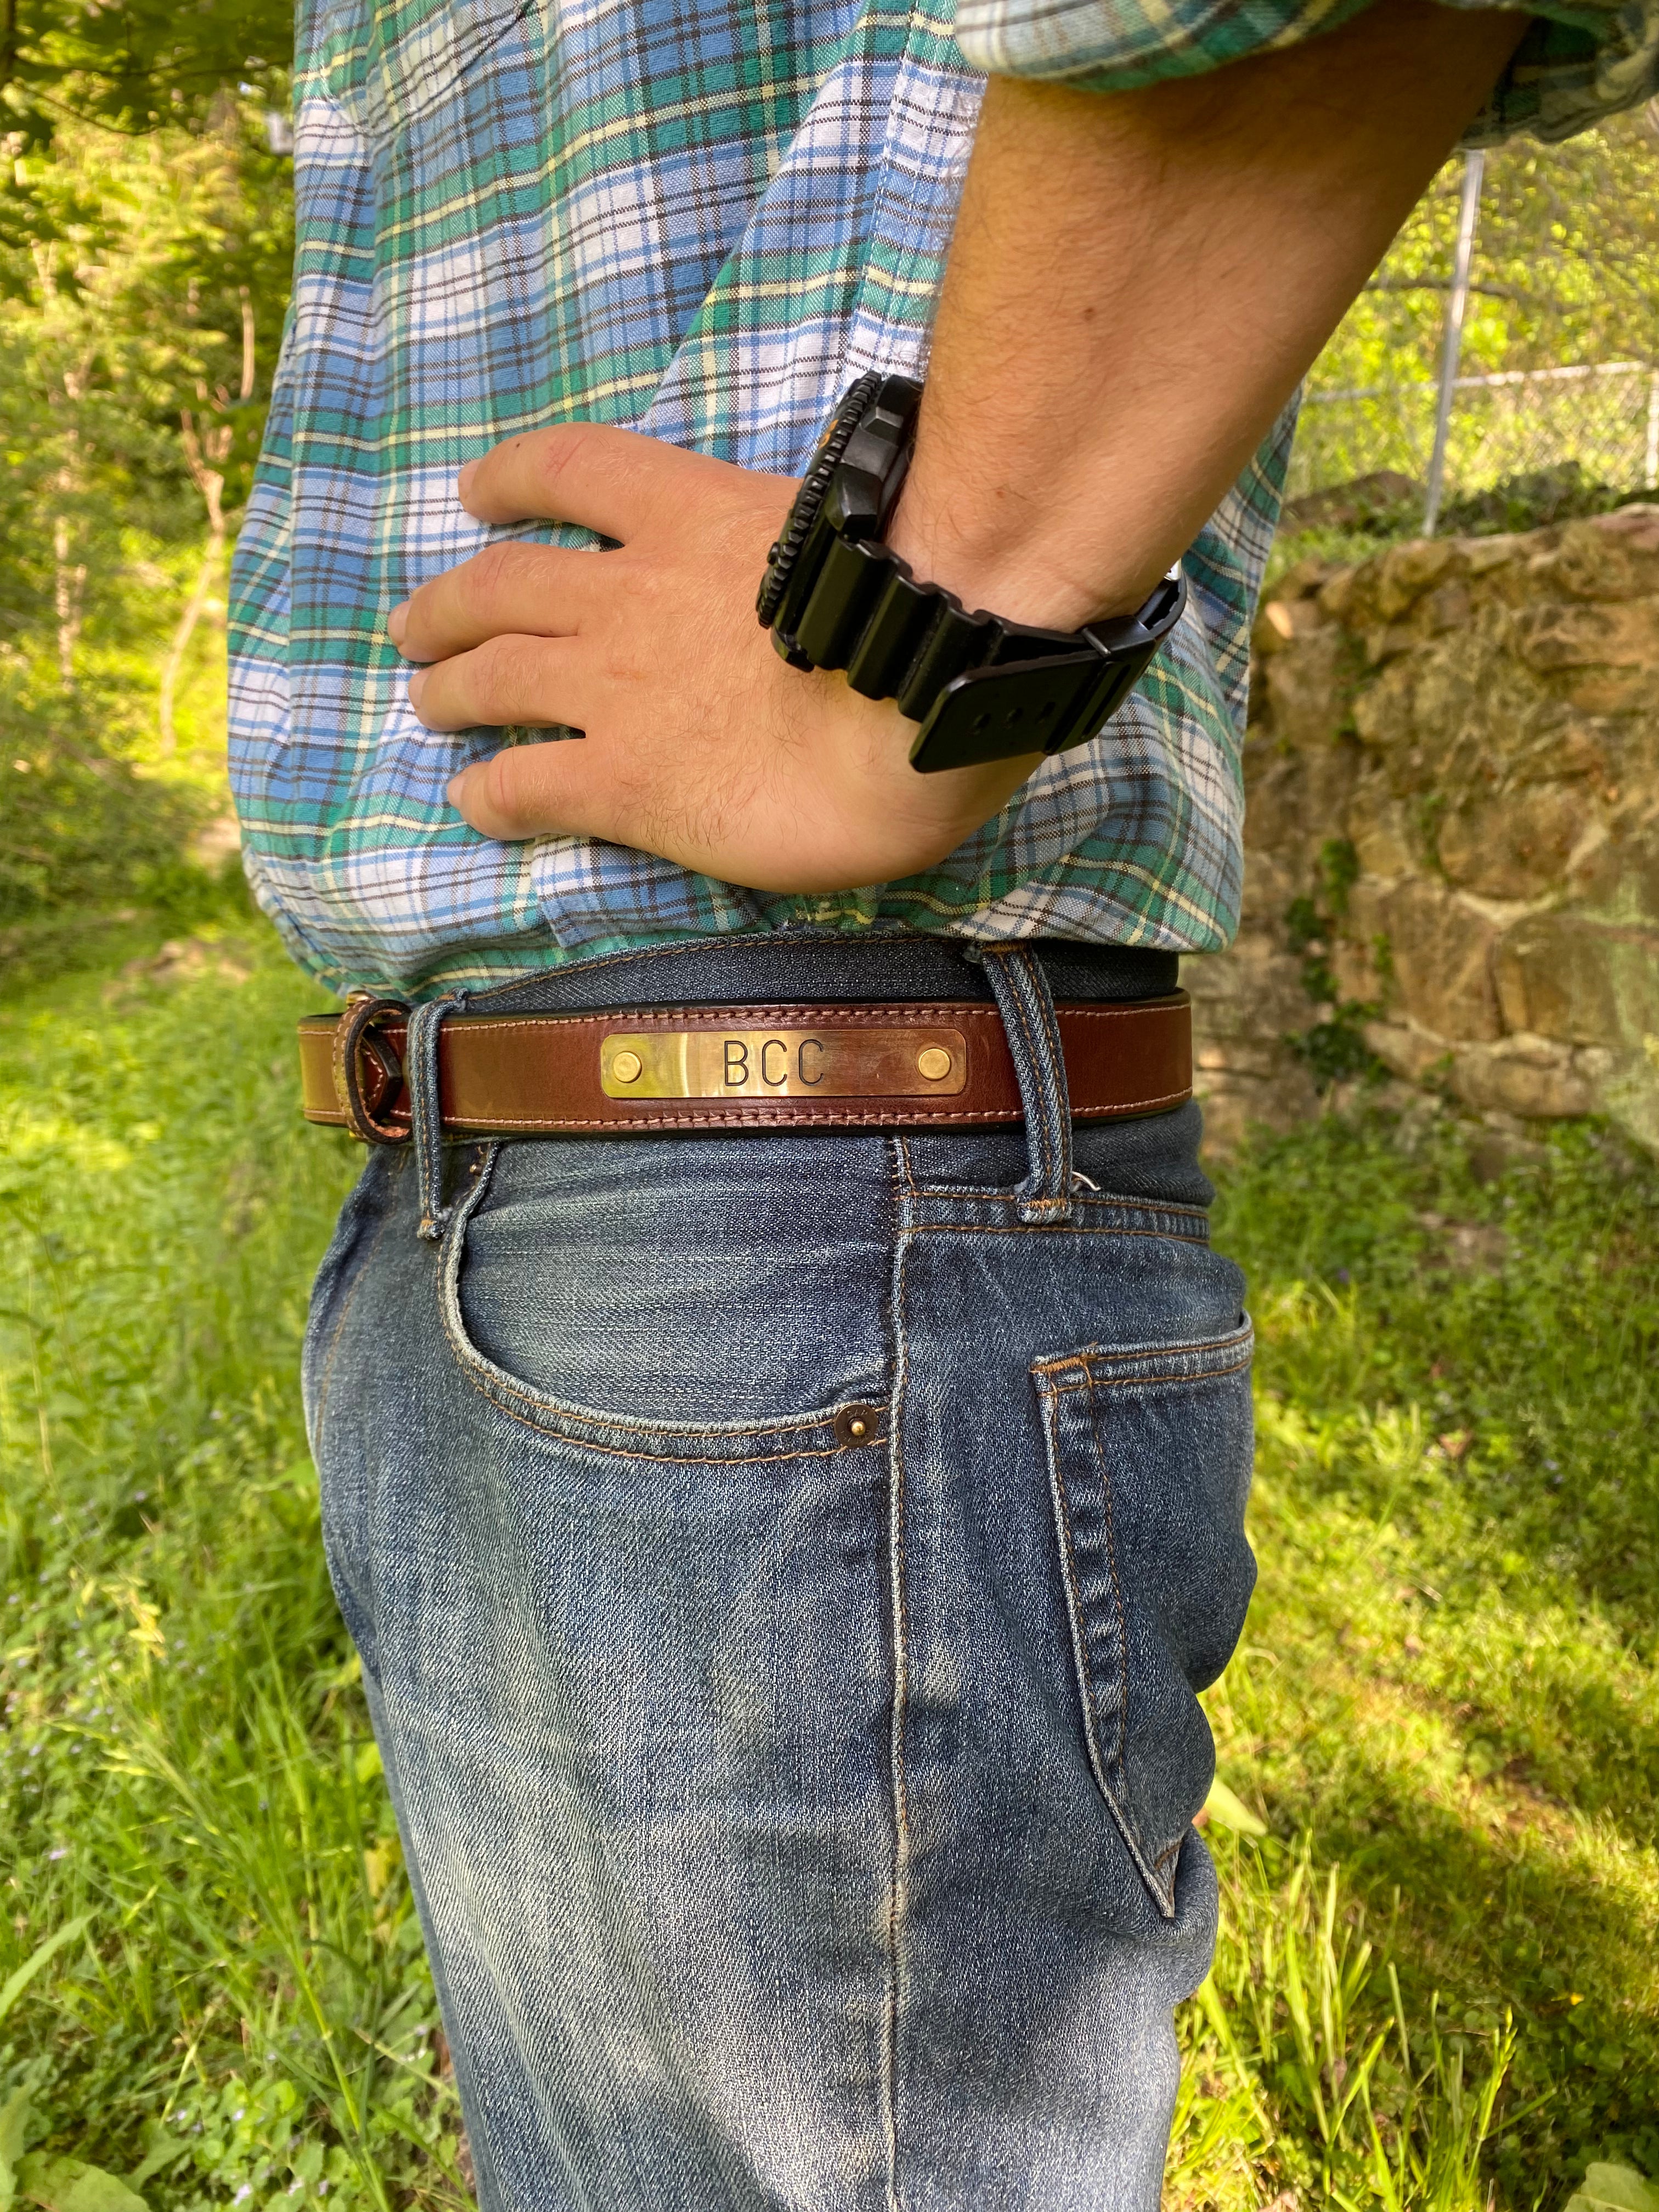 The Kentucky Belt - Stitched Brown Bridle Nameplate Belt – Clayton & Crume